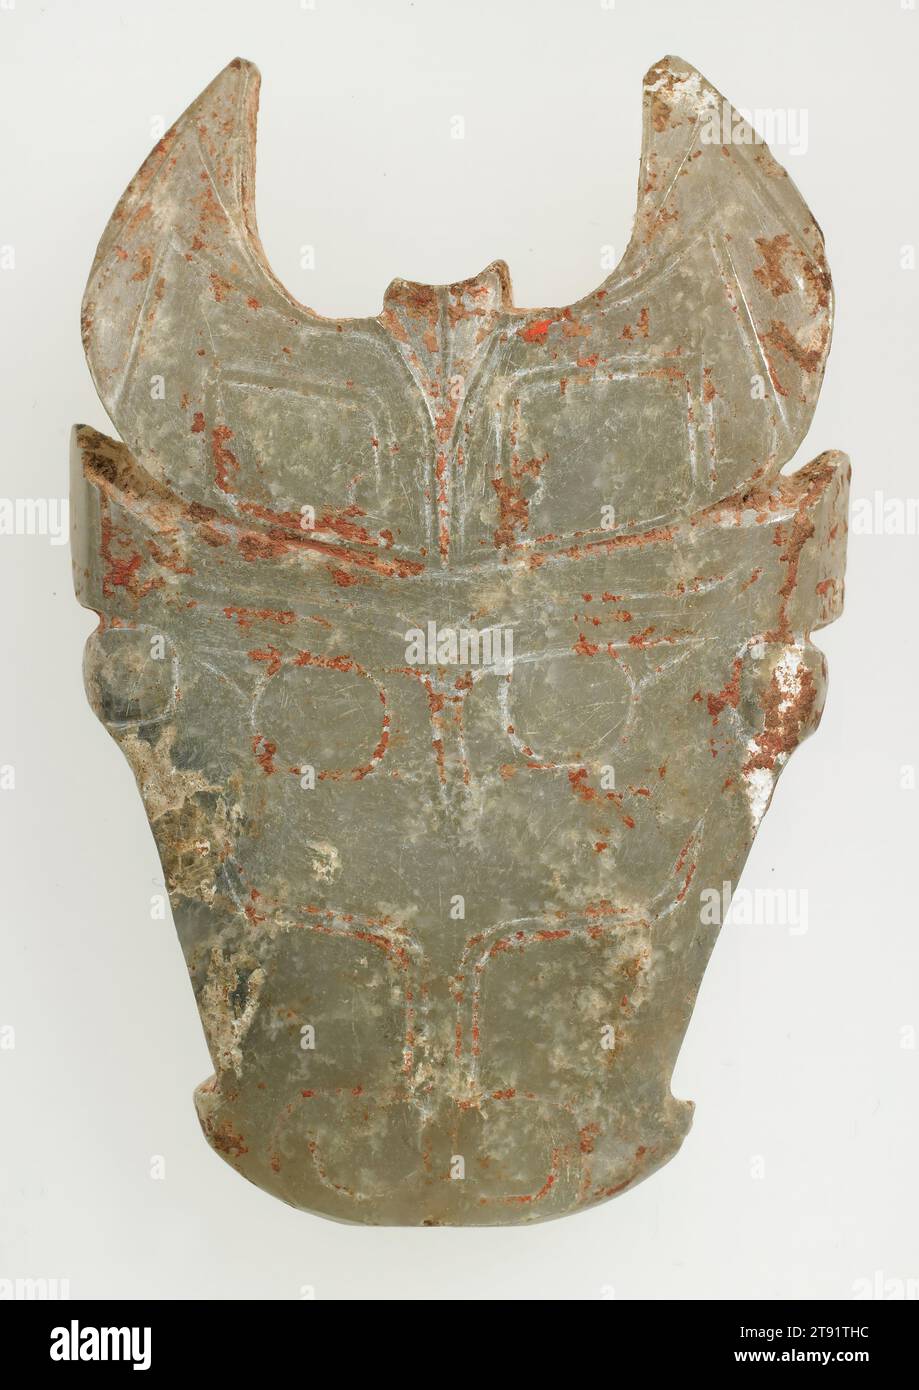 Bull-Head Pendant, 1766-1122 BCE, 2 3/4 x 1 13/16 x 5/16 in. (6.99 x 4.6 x 0.71 cm), Grey-blue jade with calcification and traces of red pigment, China, 18th-12th century BCE Stock Photo